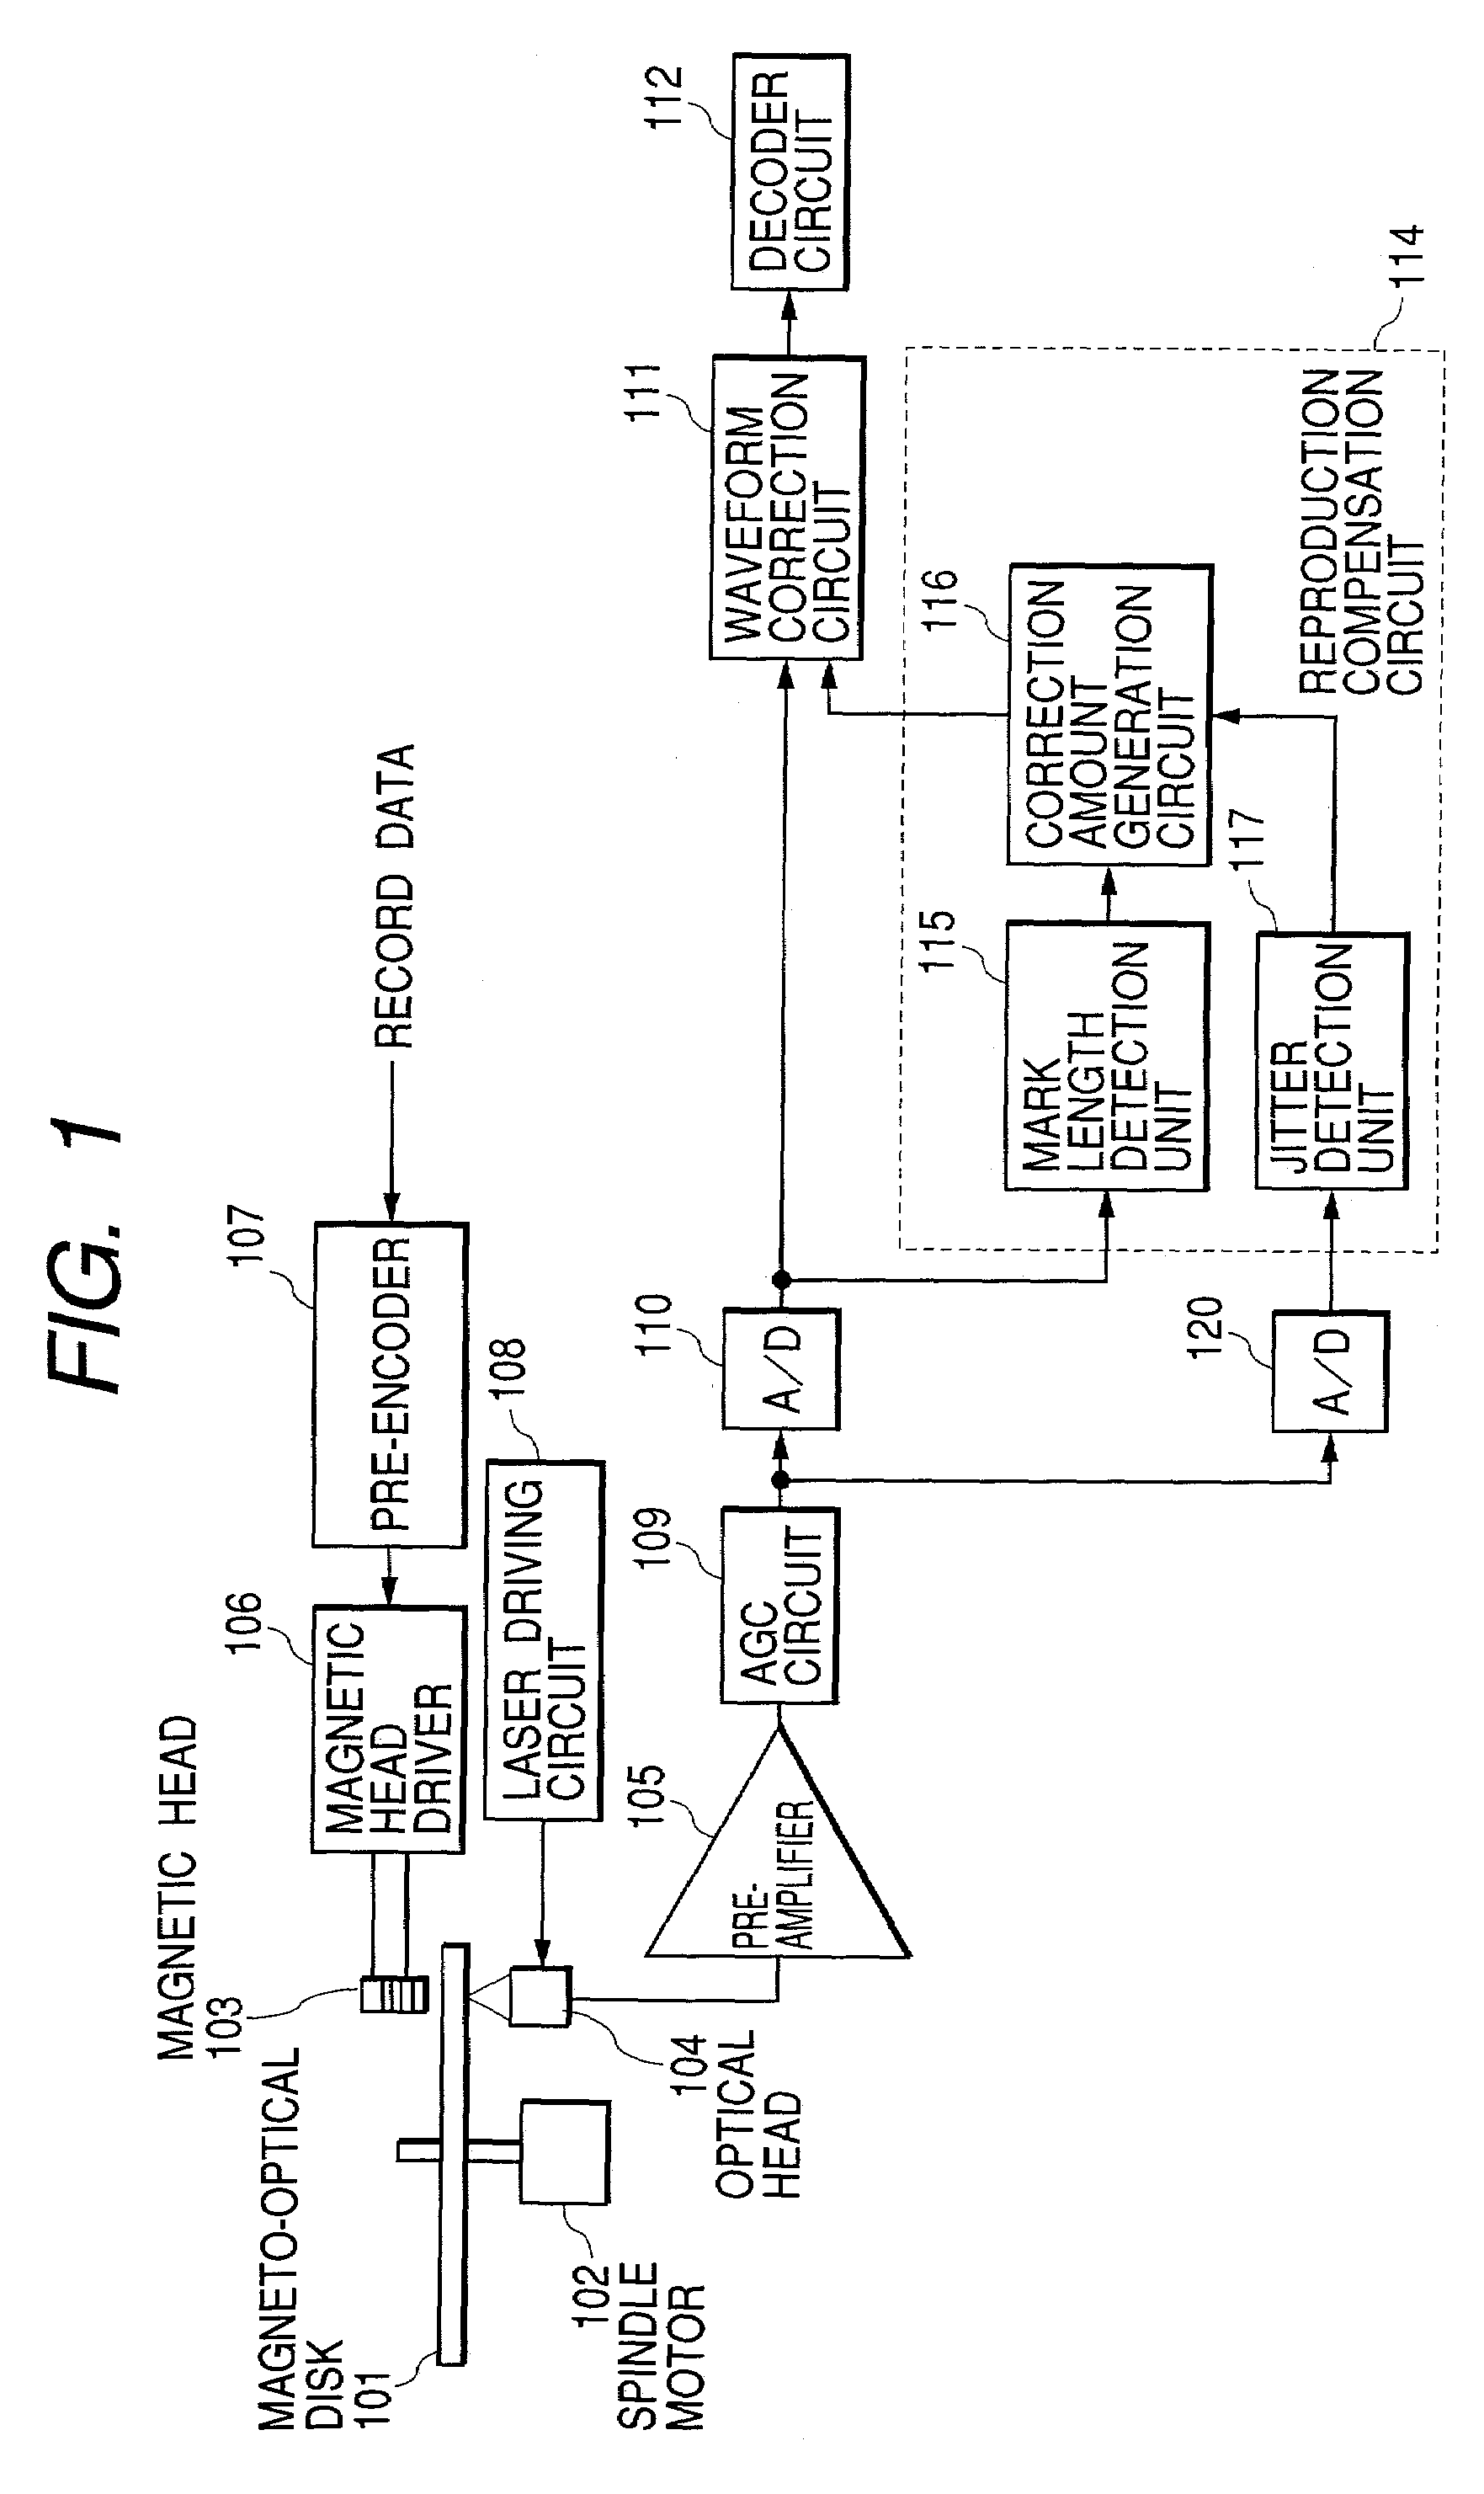 Optical information reproducing method and apparatus for performing reproduction compensation